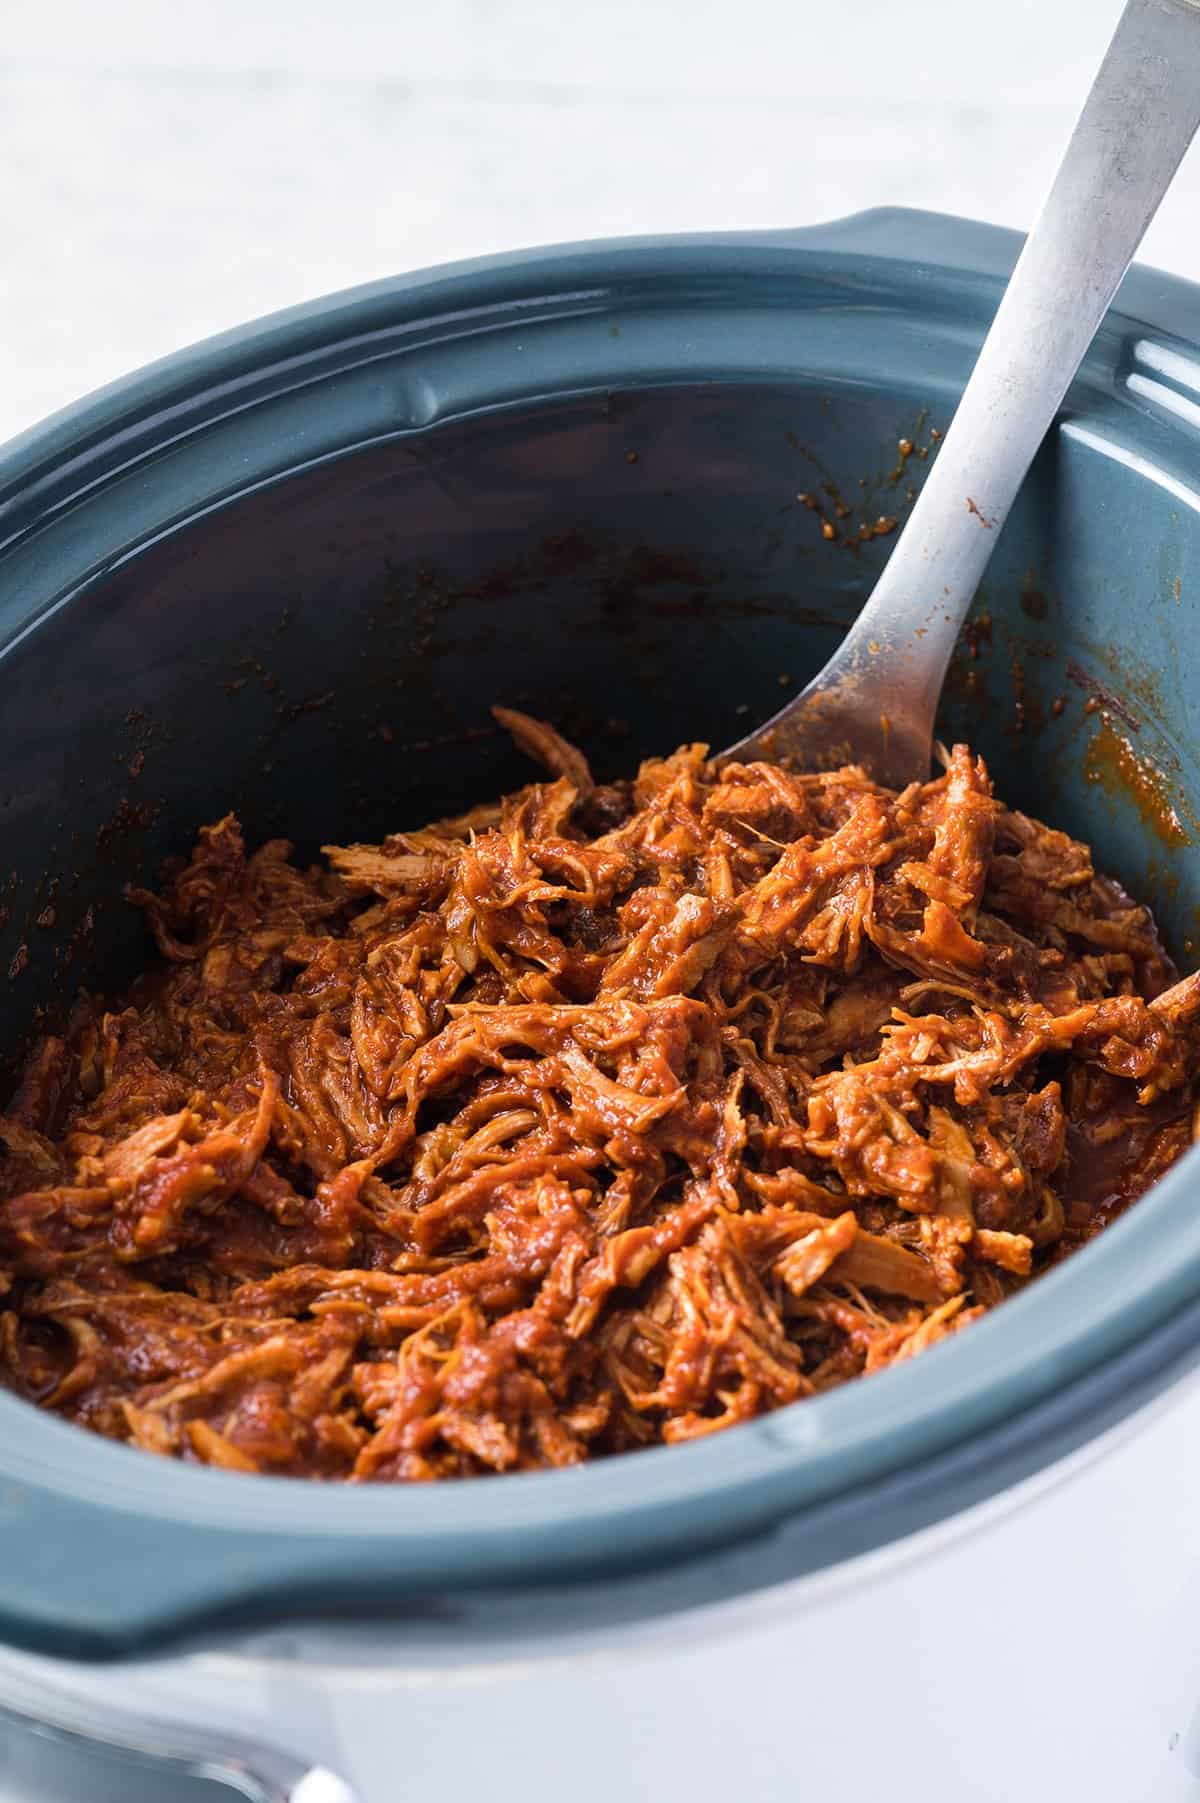 ow to make pulled pork in the crock pot